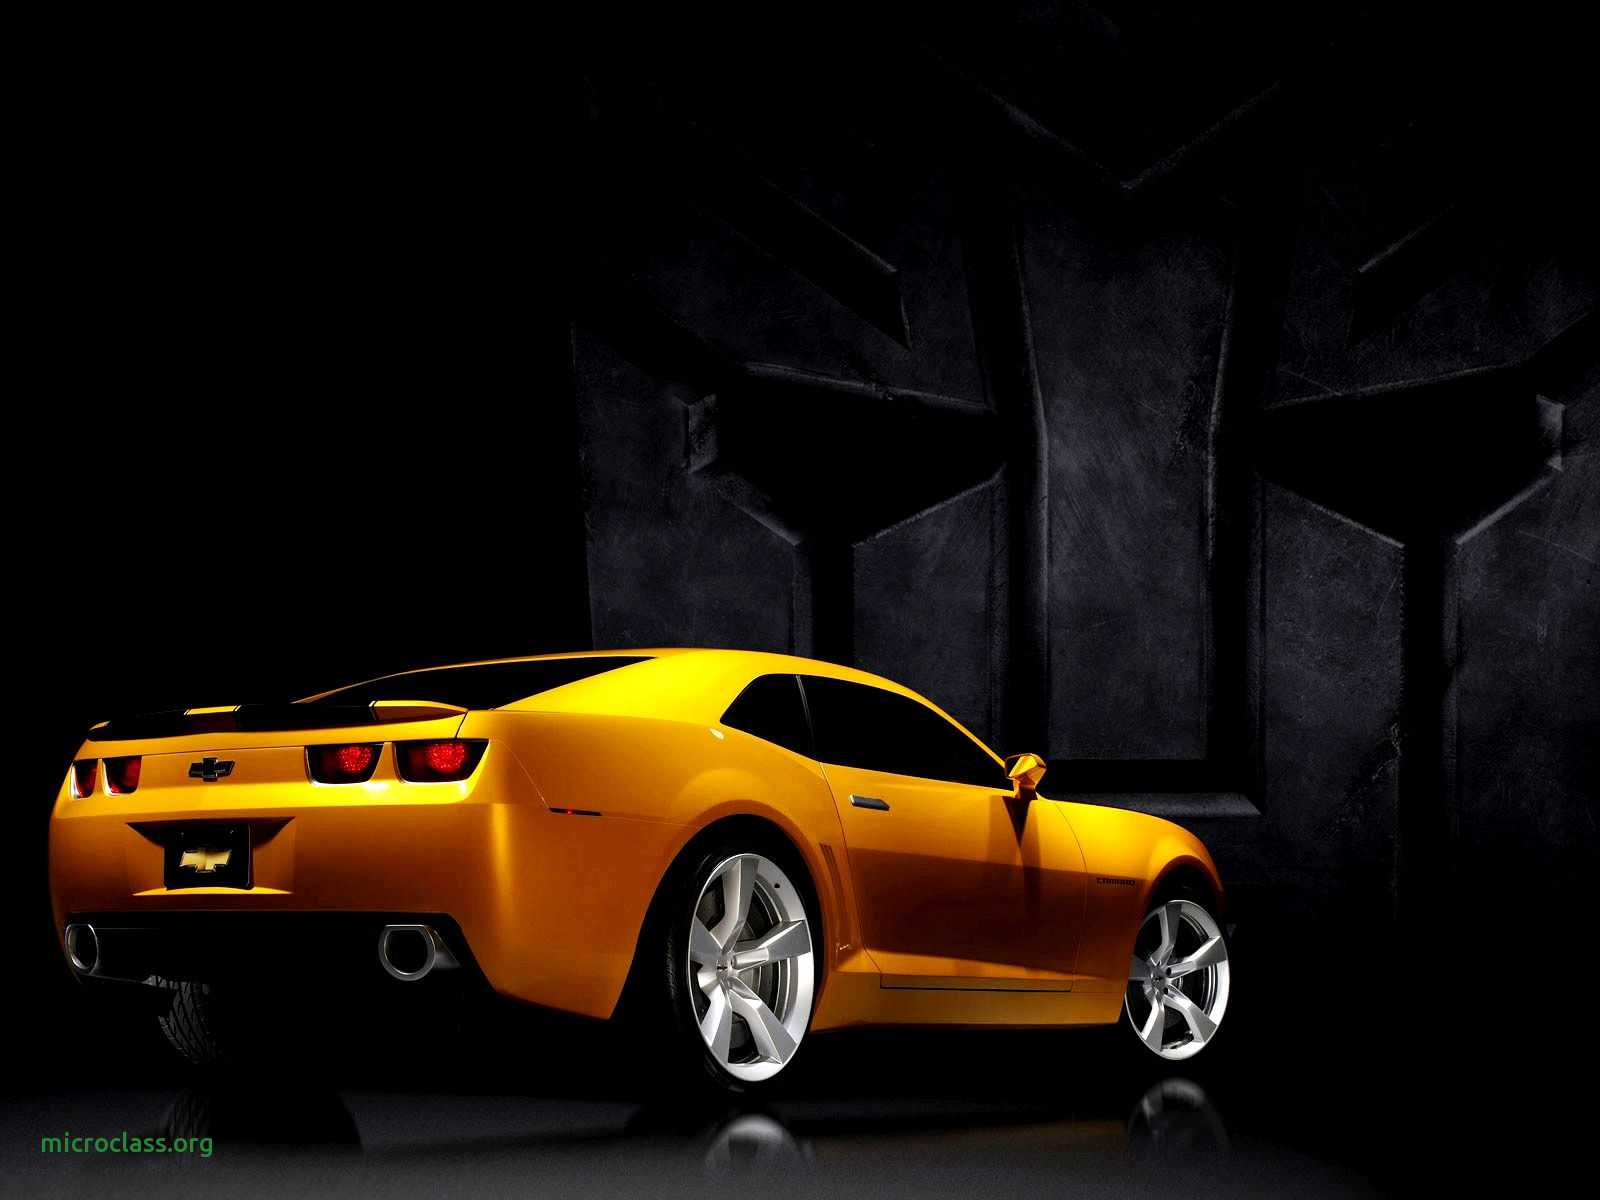 Image Detail for Bumblebee Transformers HD Wallpaper Download Free